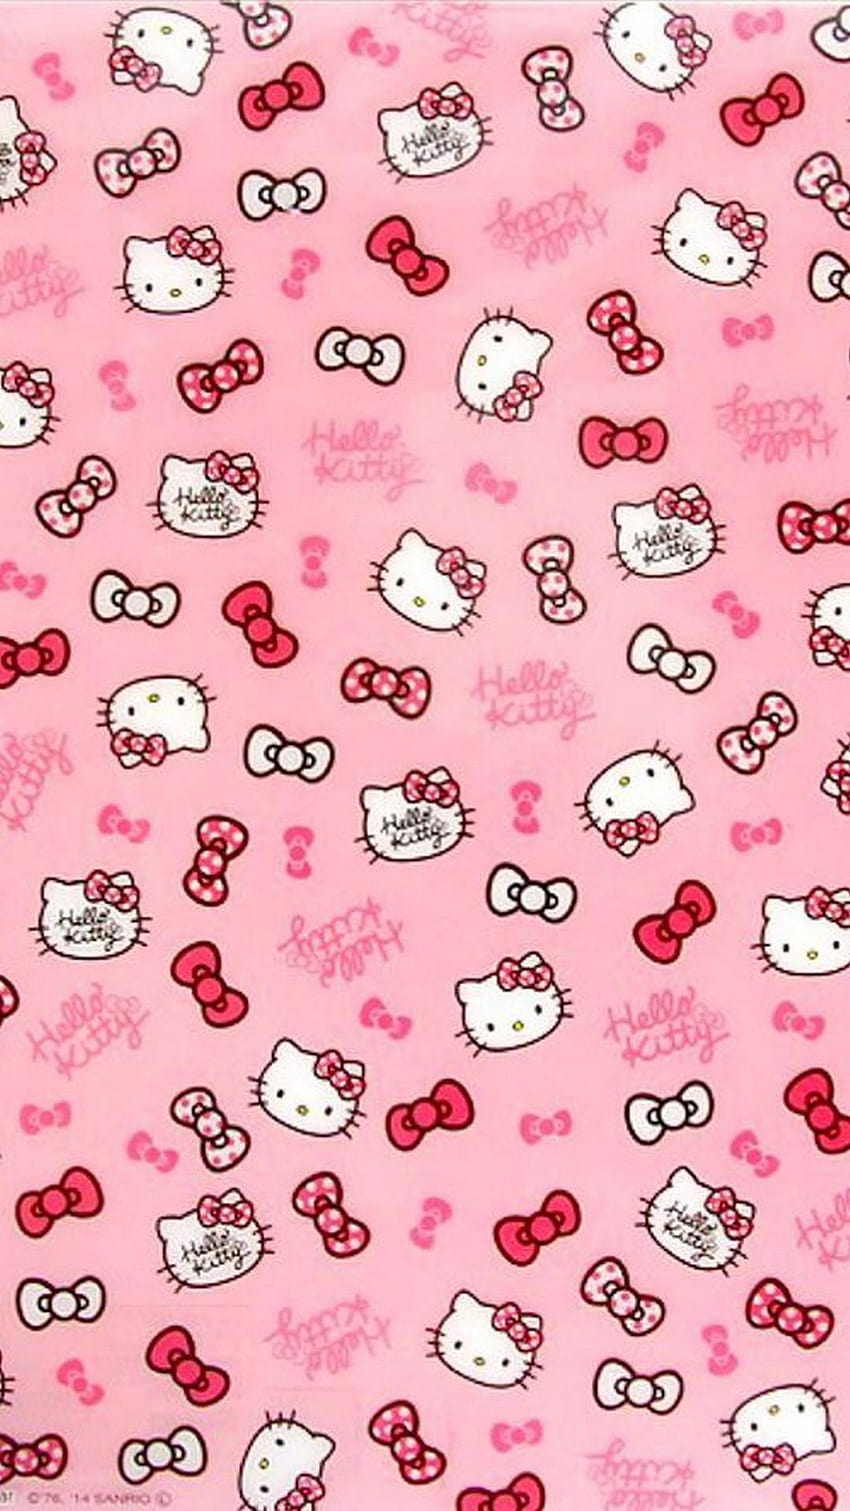 Hello Kitty iPhone Wallpaper - Cute and Playful Design